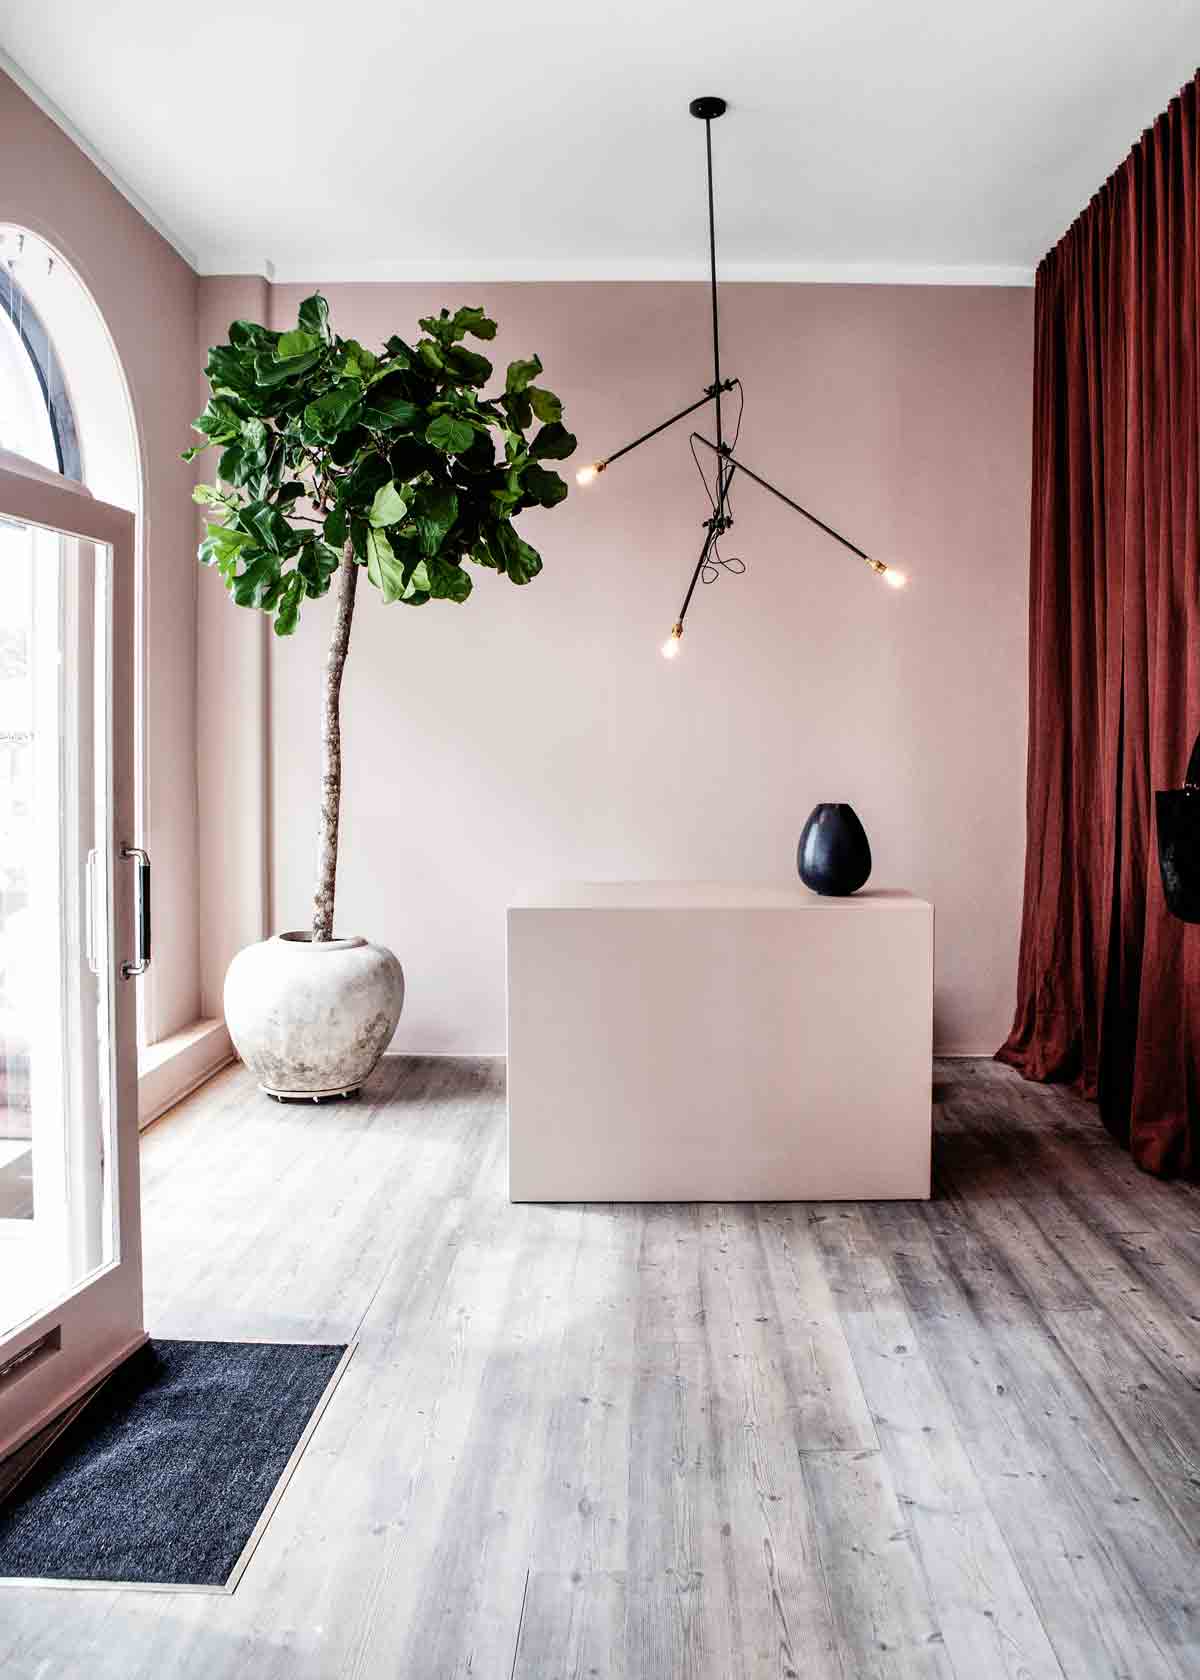 How To Decorate With Pale Pinks: Blush And Pastel Pink Interiors